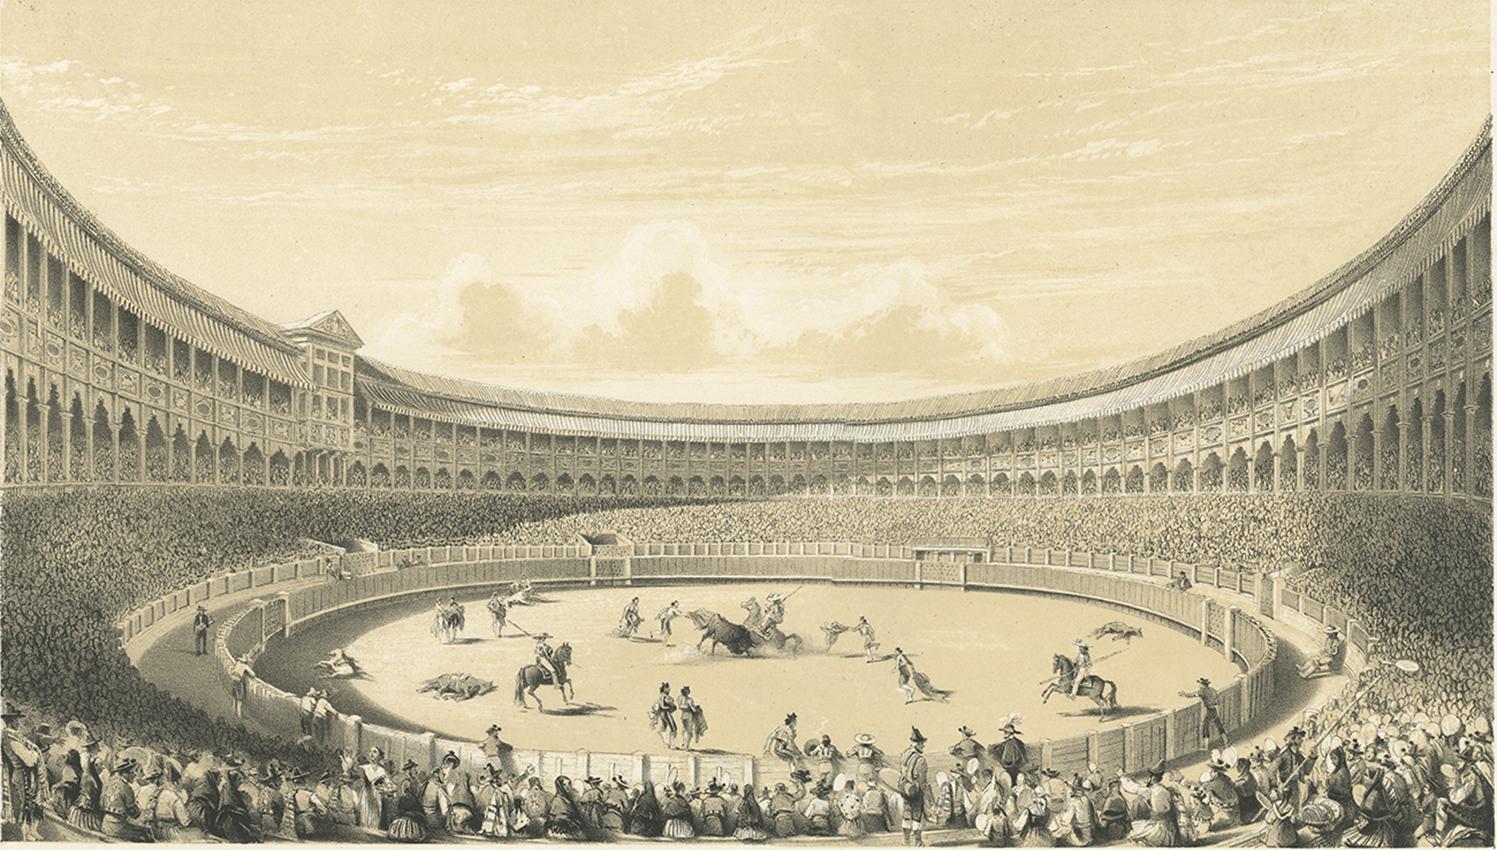 Antique print titled 'The Plaza de Toros of Madrid'. This print illustrates the bullfighting in Spain. Unknown engraver.